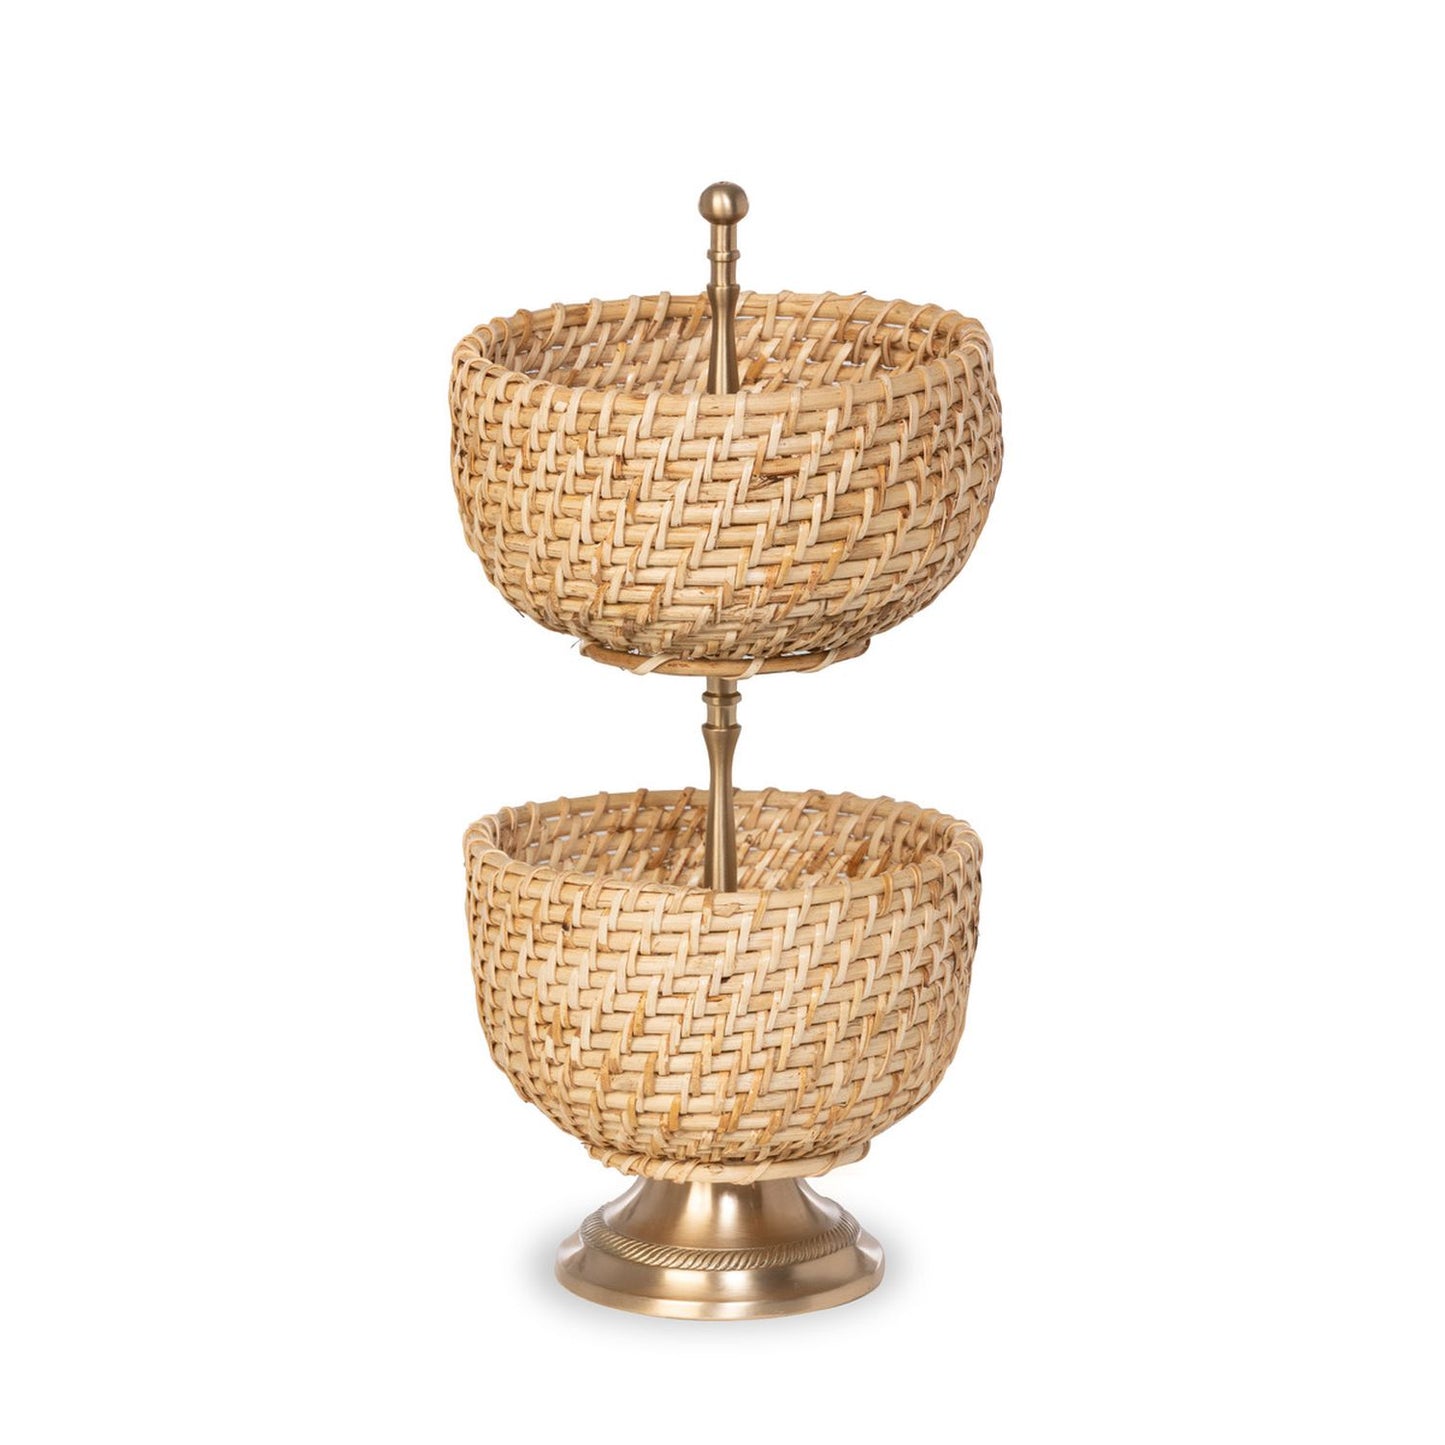 Park Hill Collection Amelia Woven Bamboo Cane Tiered Server